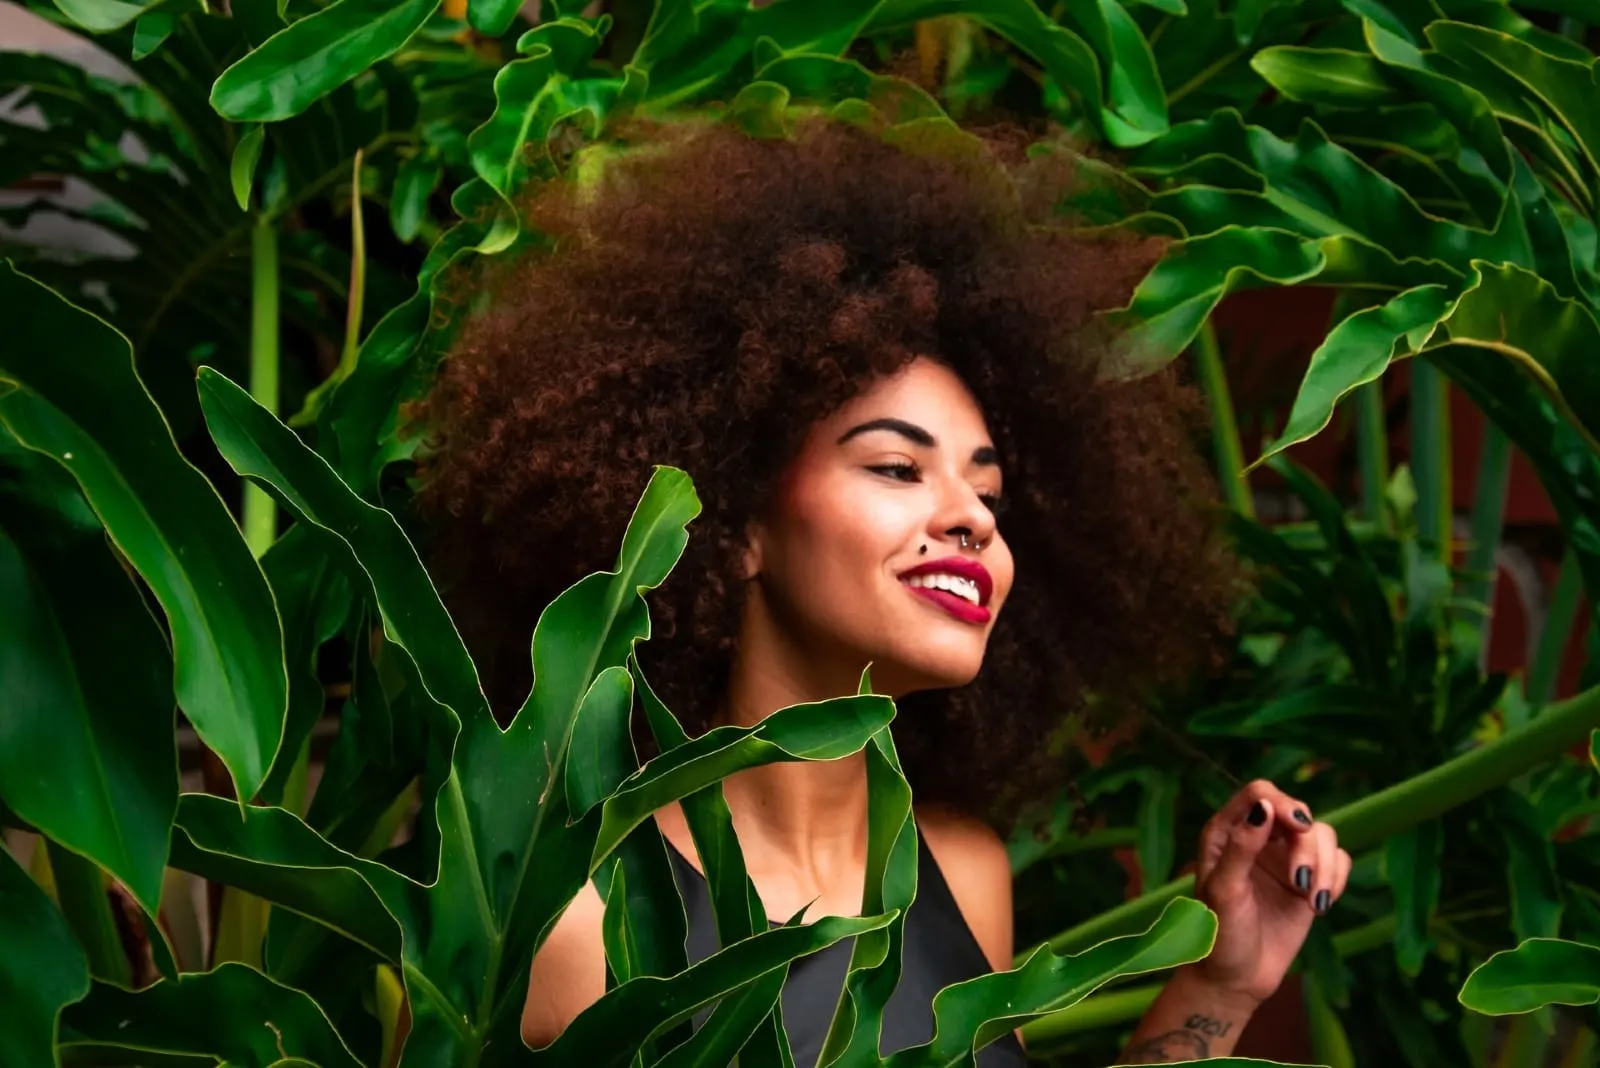 happy woman with curly hair standing near plant